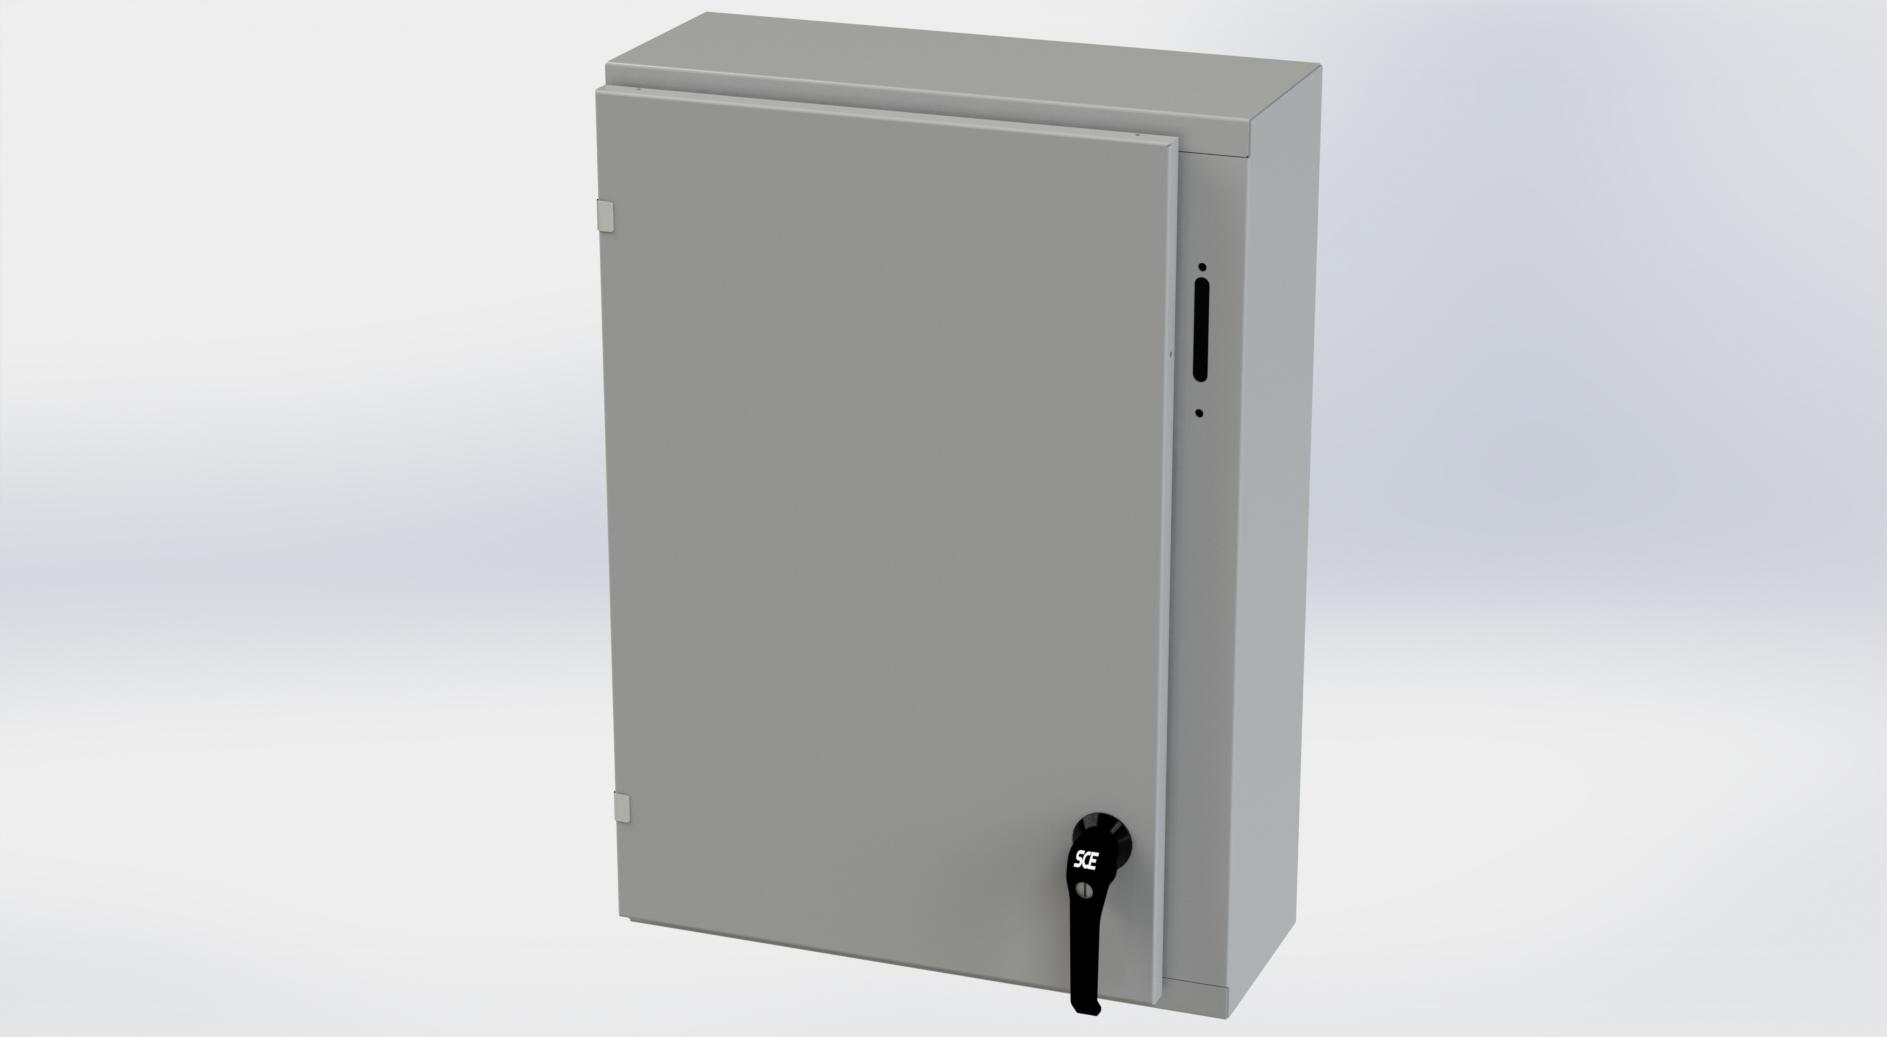 Saginaw Control SCE-30XEL2108LP XEL LP Enclosure, Height:30.00", Width:21.38", Depth:8.00", ANSI-61 gray powder coating inside and out. Optional sub-panels are powder coated white.